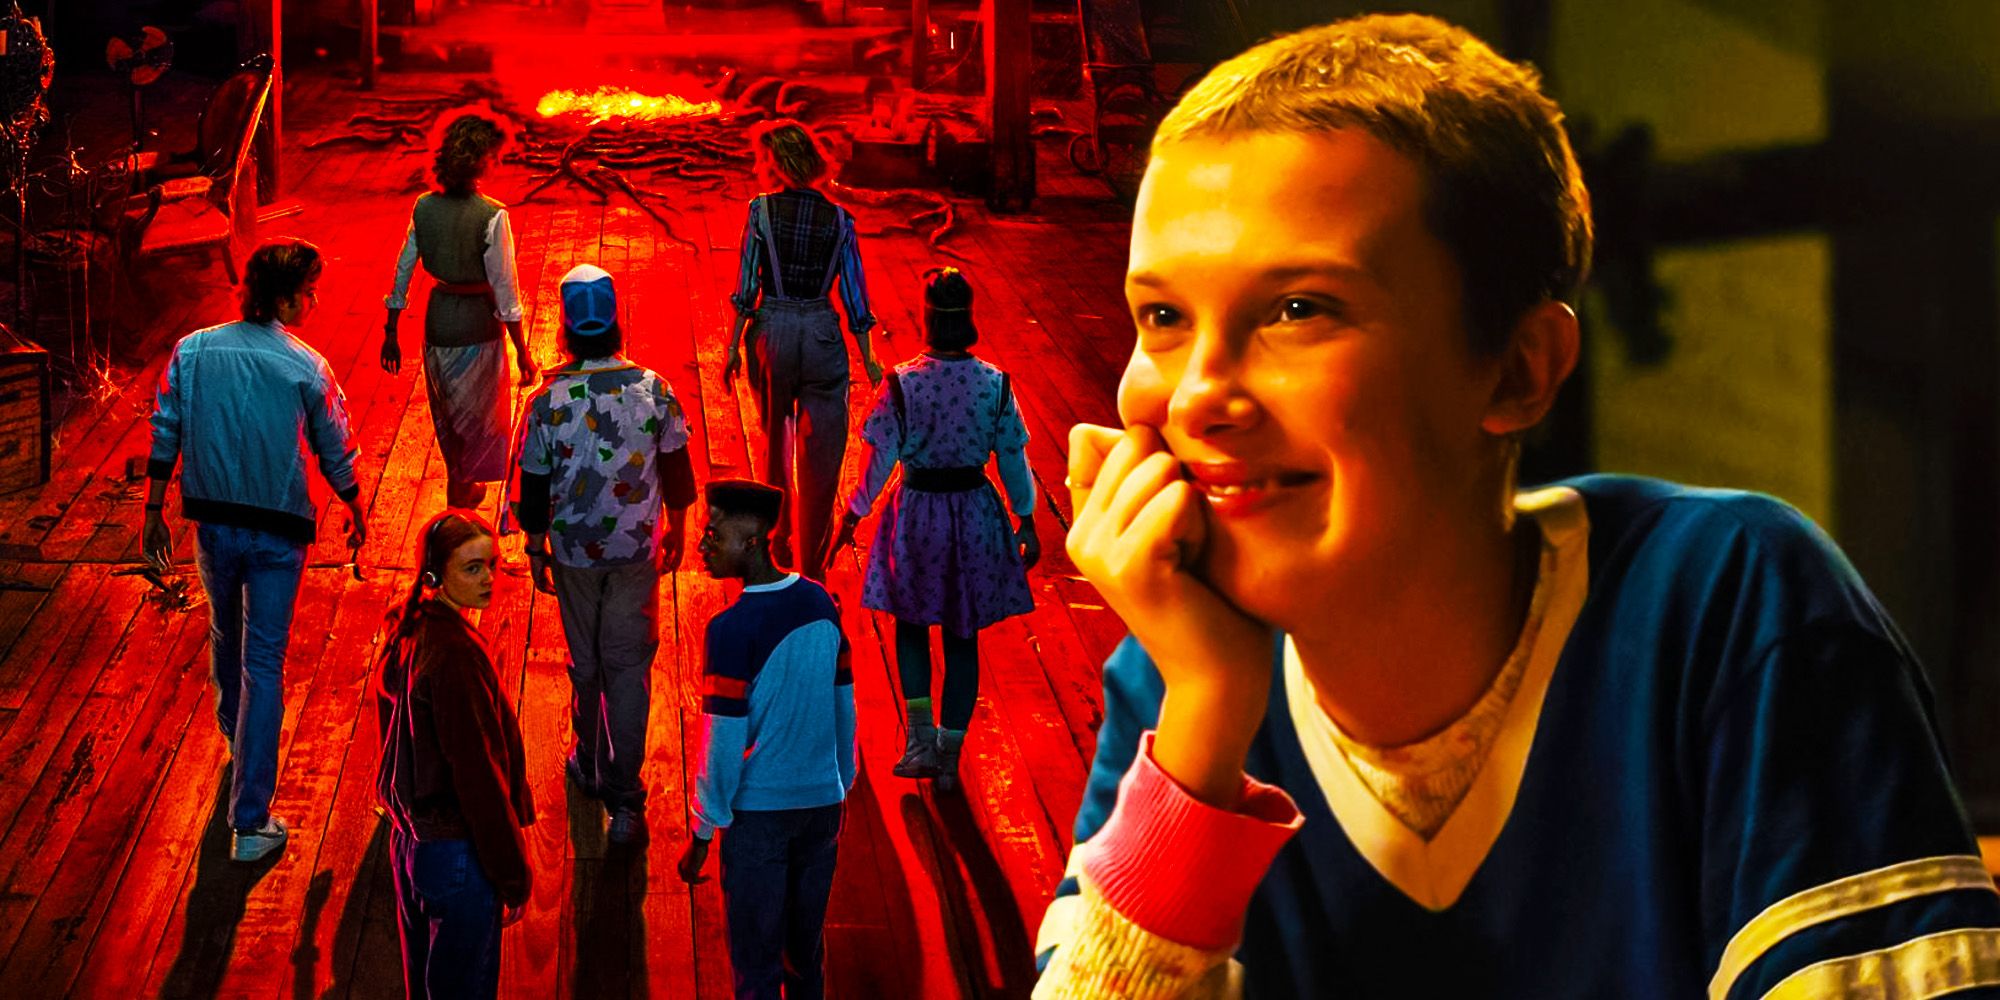 stranger things season 4 poster and eleven smiling with shaved head